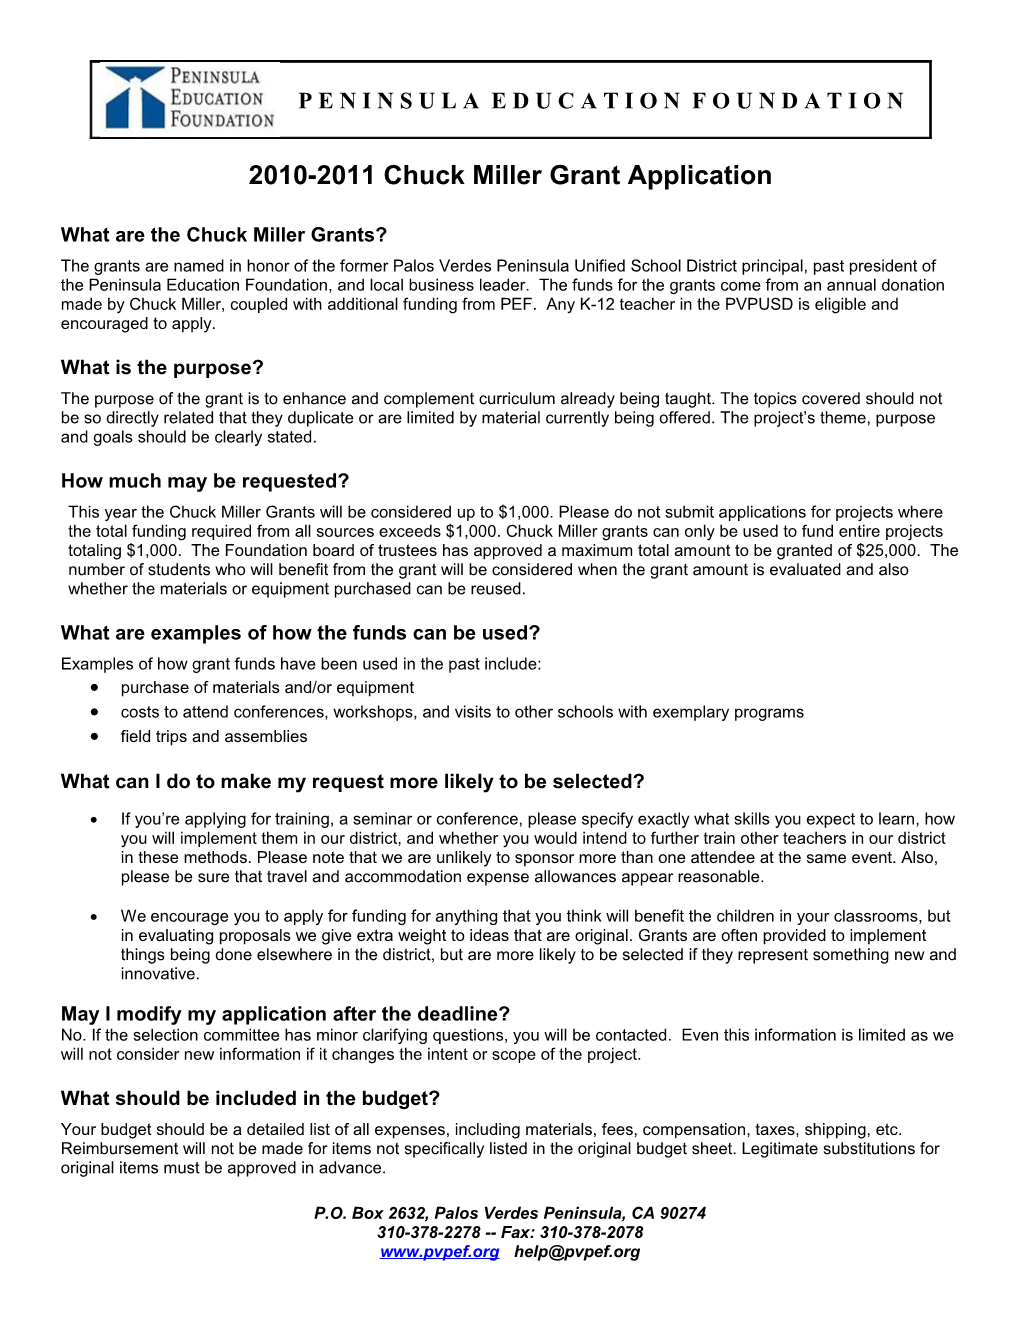 What Are the Chuck Miller Grants